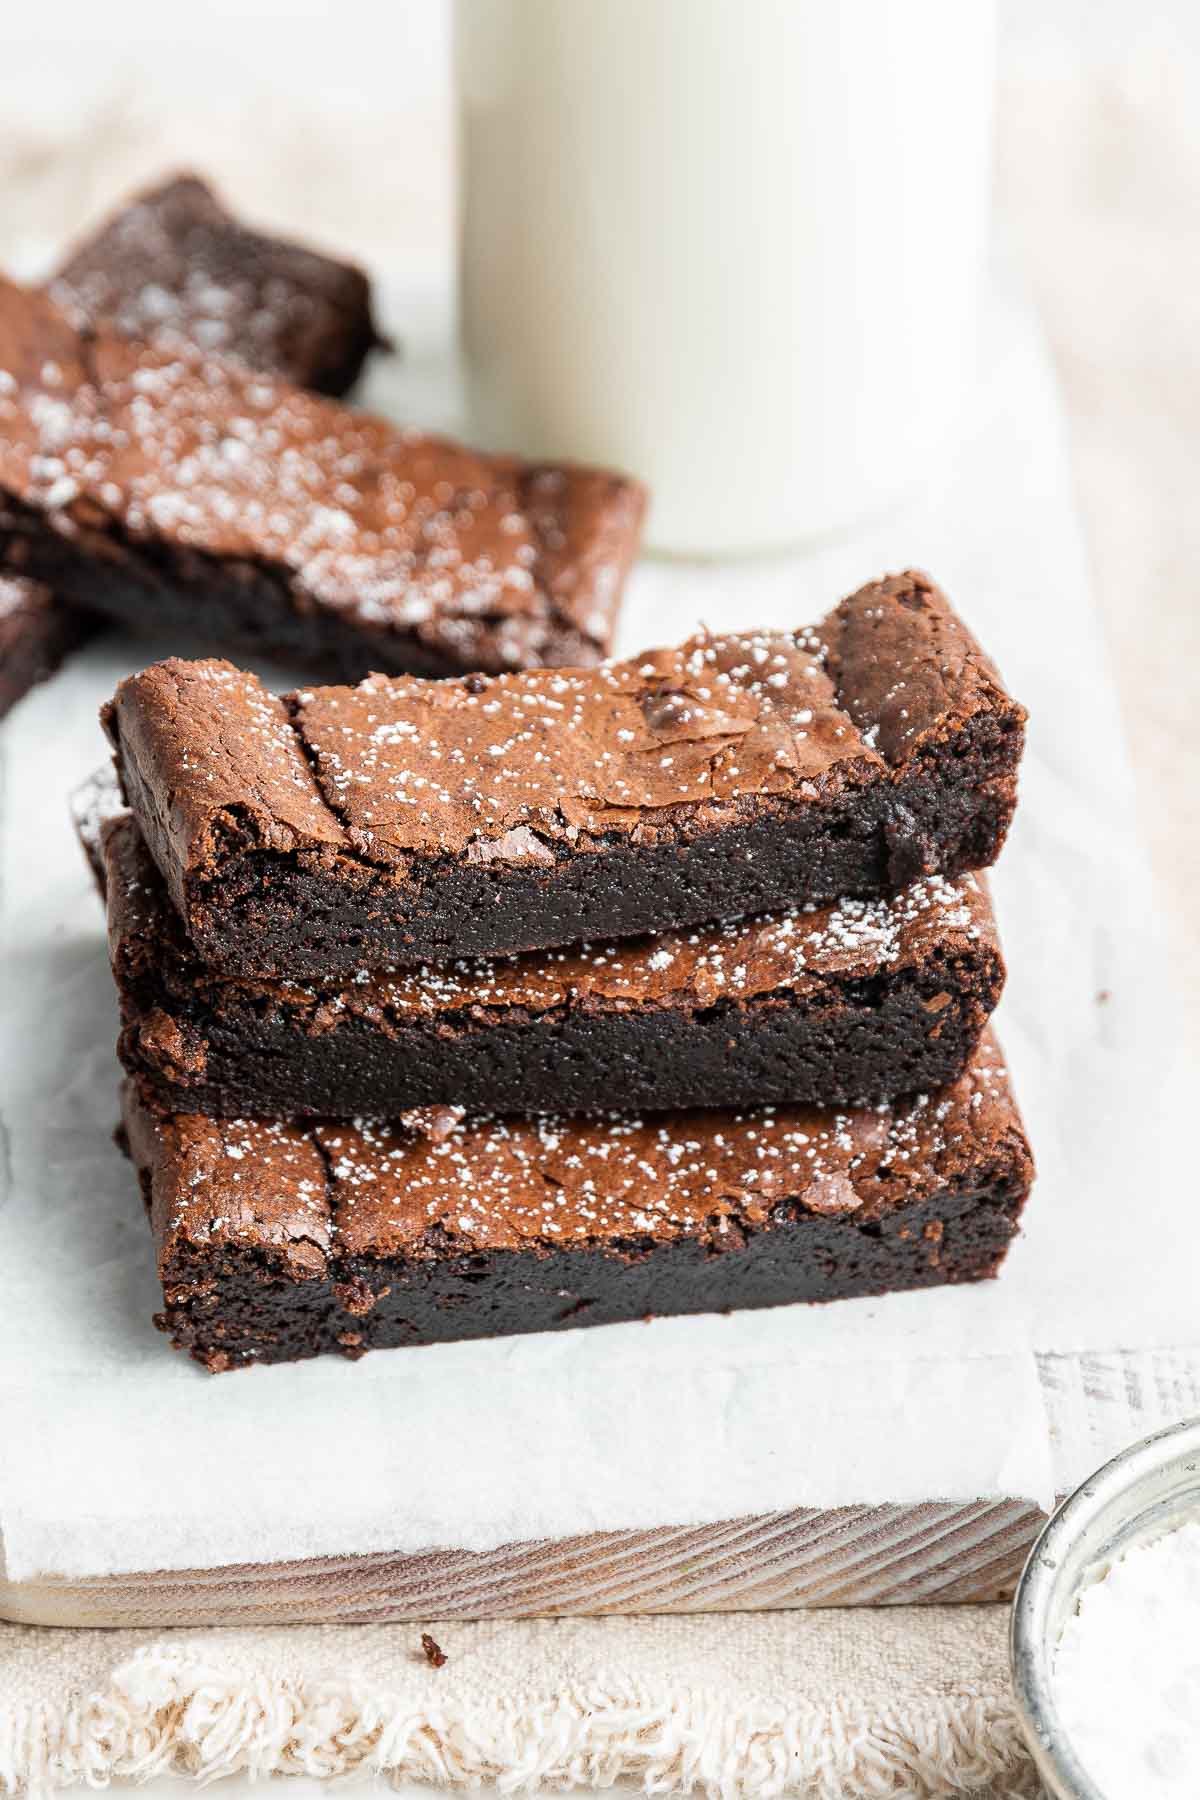 https://www.dessertfortwo.com/wp-content/uploads/2016/01/Small-batch-Brownies-for-Two-11.jpg